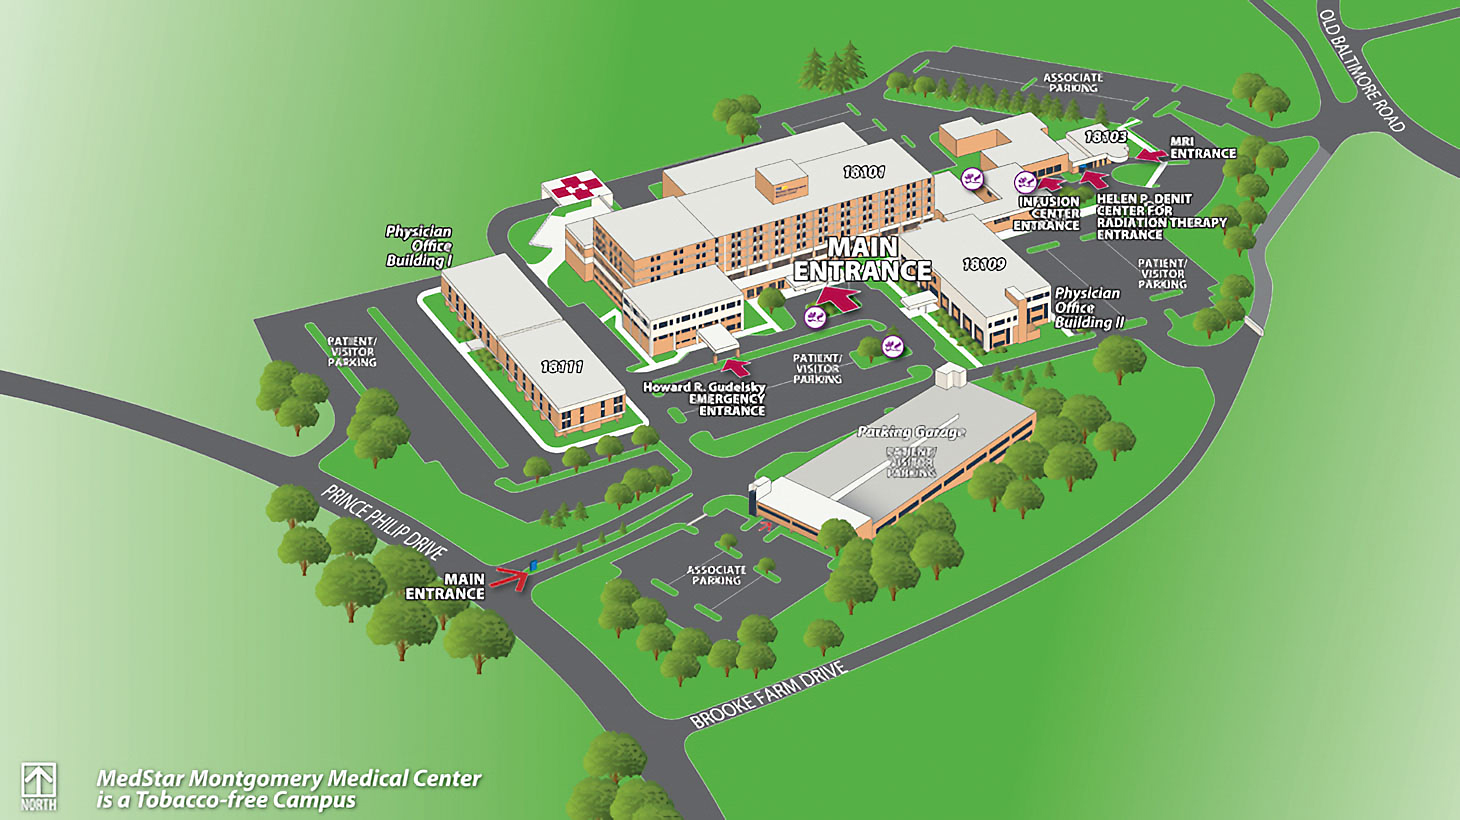 Map of the MedStar Montgomery Medical Center campus